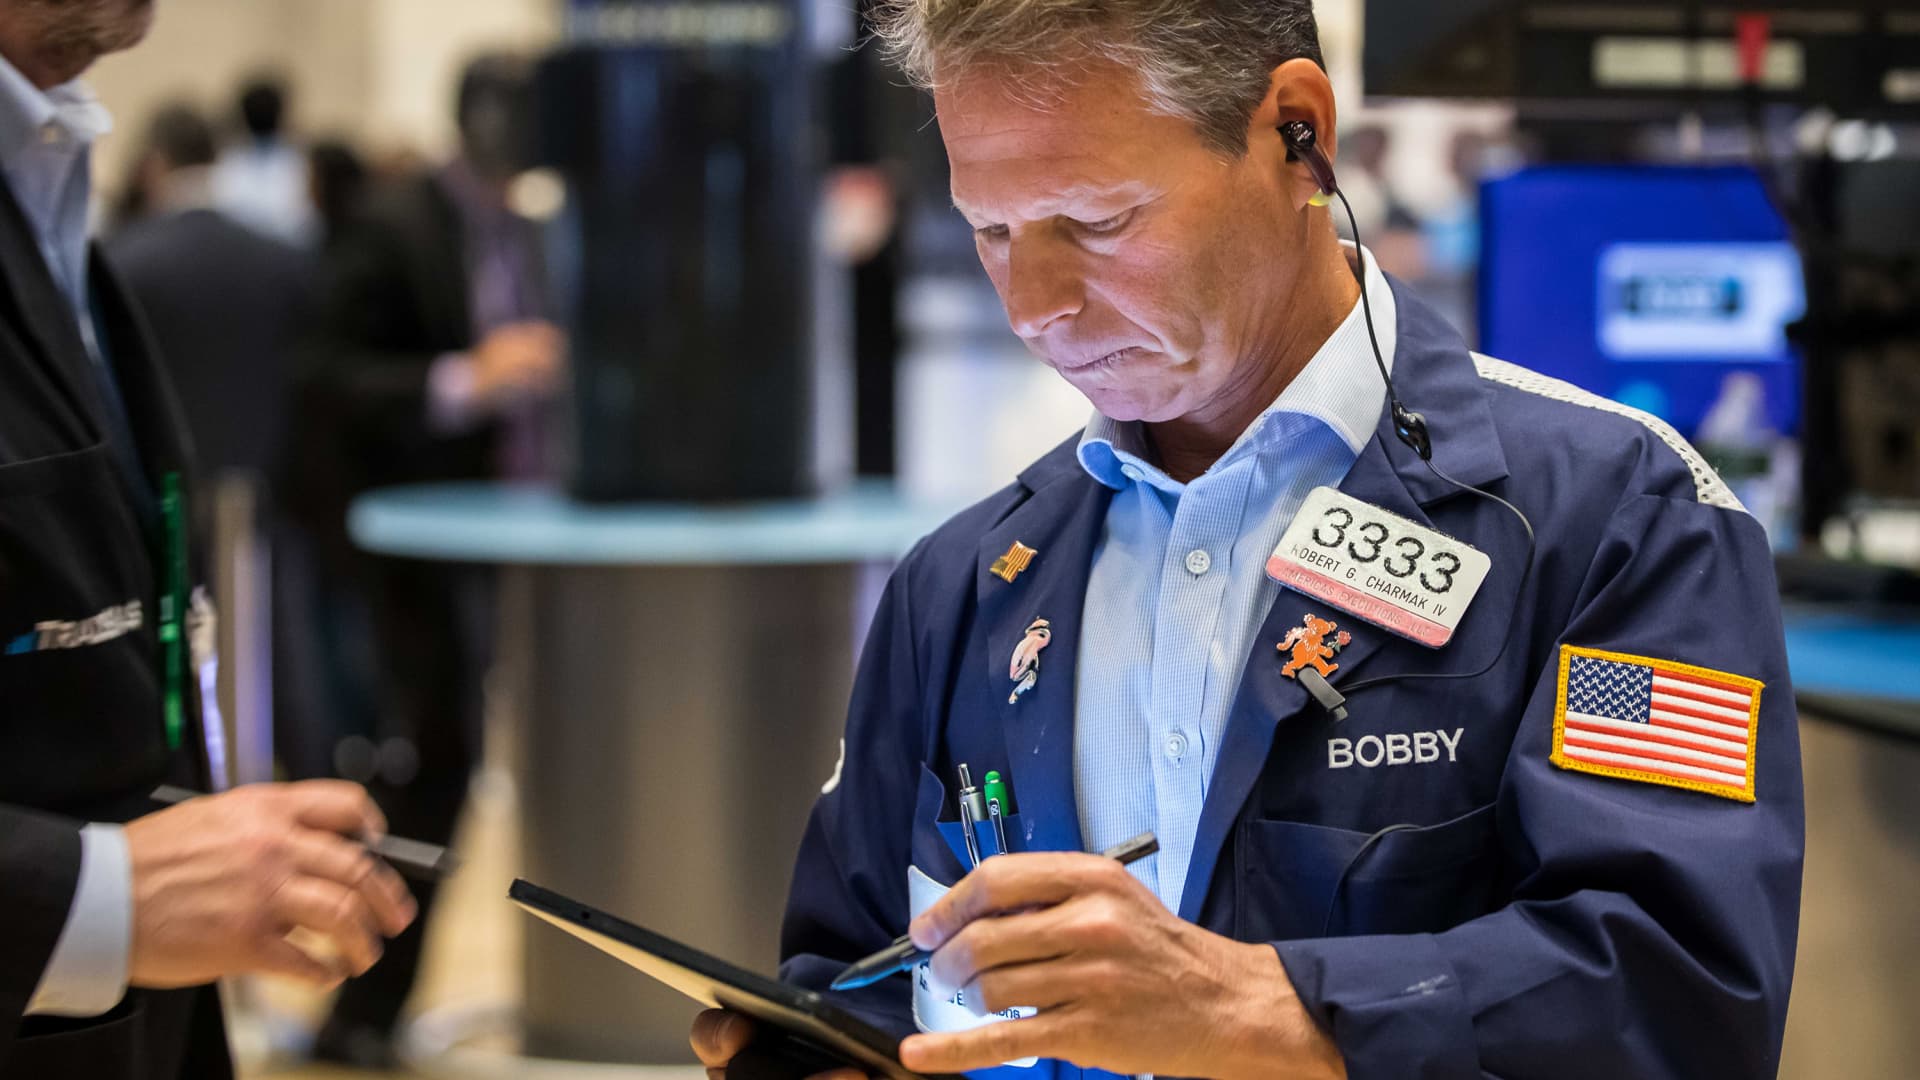 Tech sell-off is a ‘generational buying opportunity’ for the ‘right’ stocks, says analyst Ives